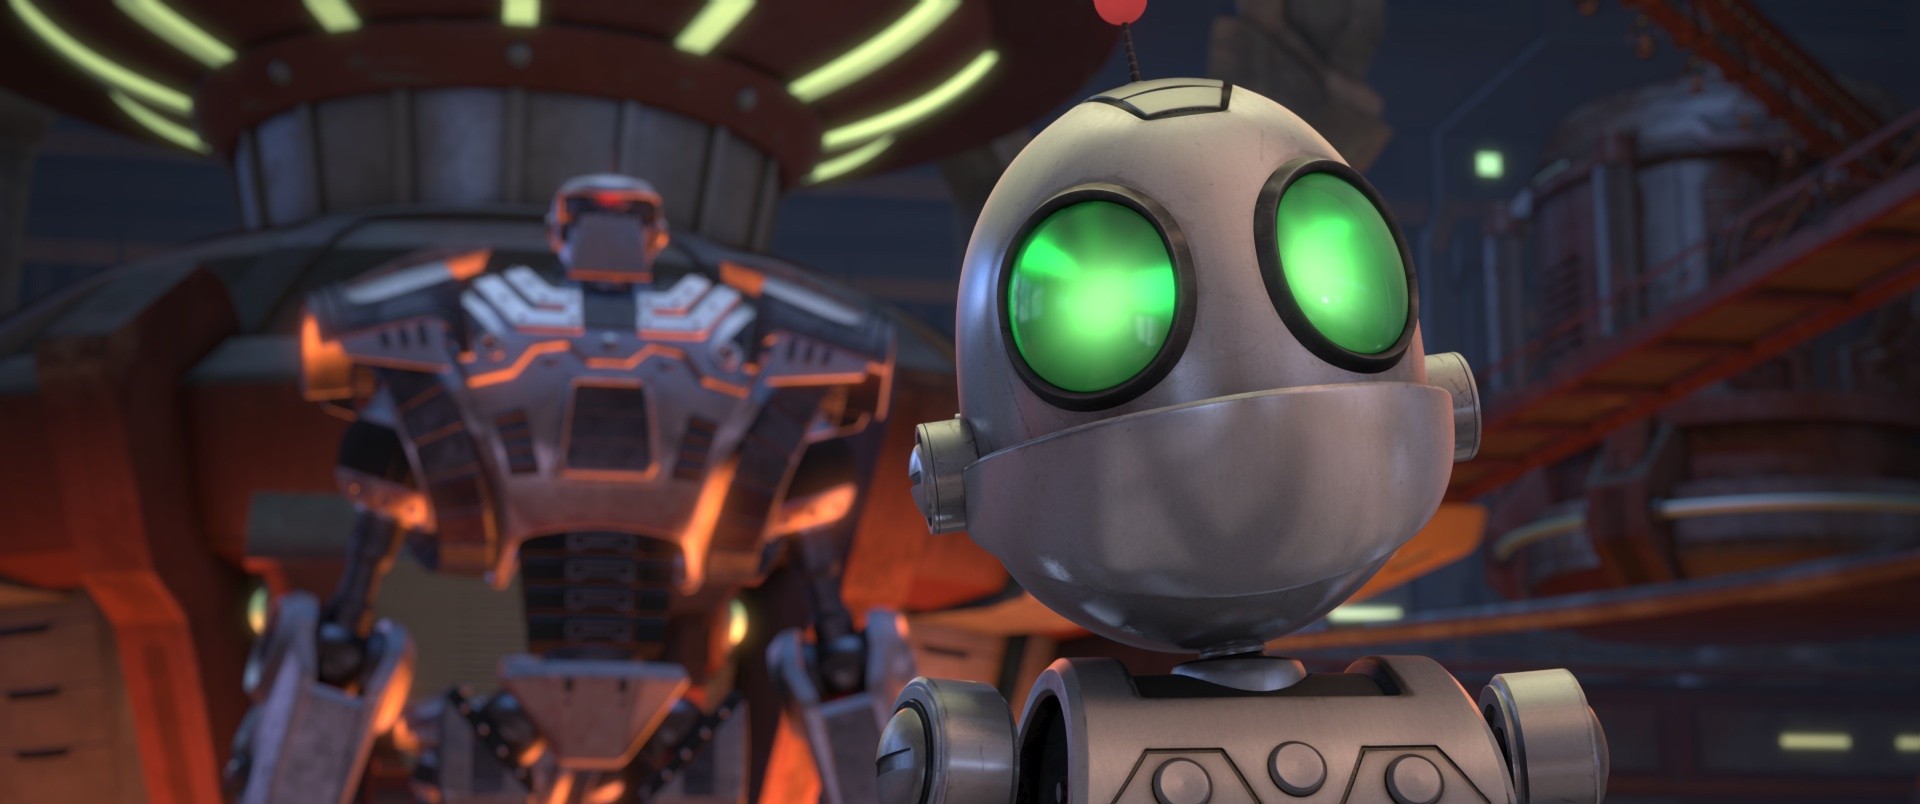 Clank from Gramercy Pictures' Ratchet & Clank (2016)